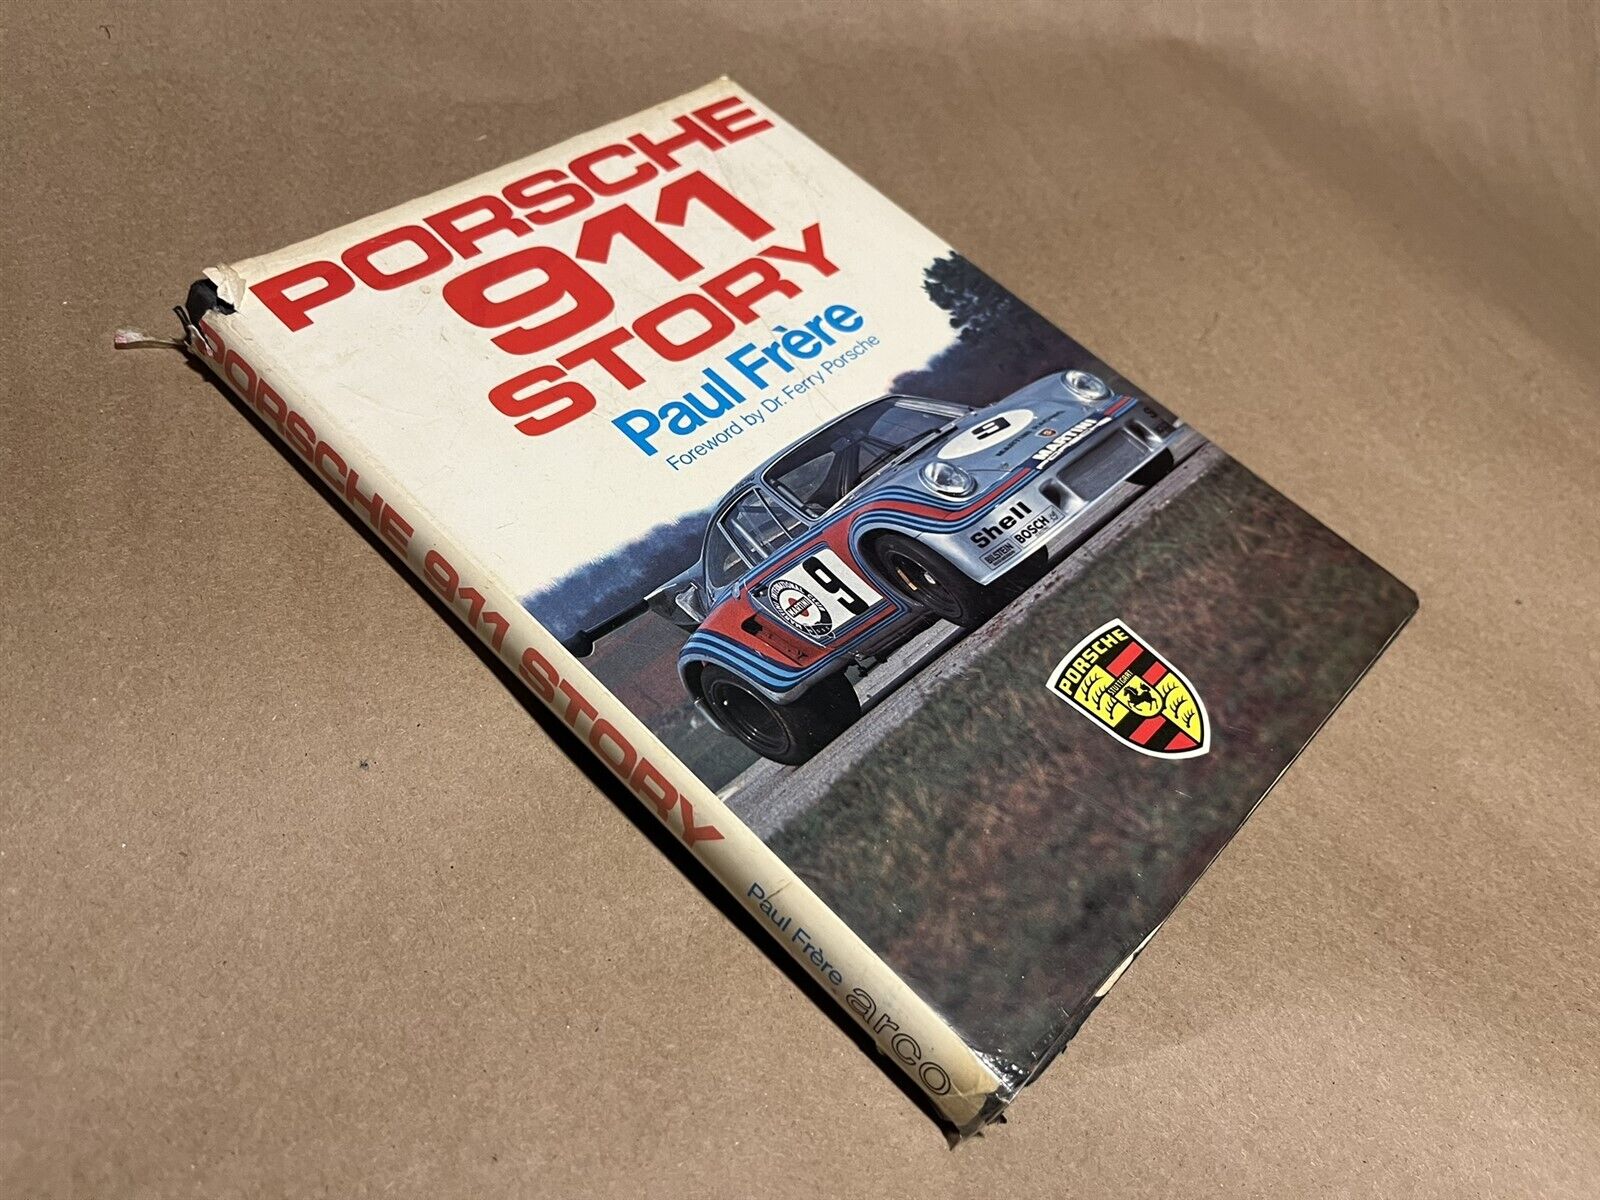 Book Porsche 911 Story by Frere 1976